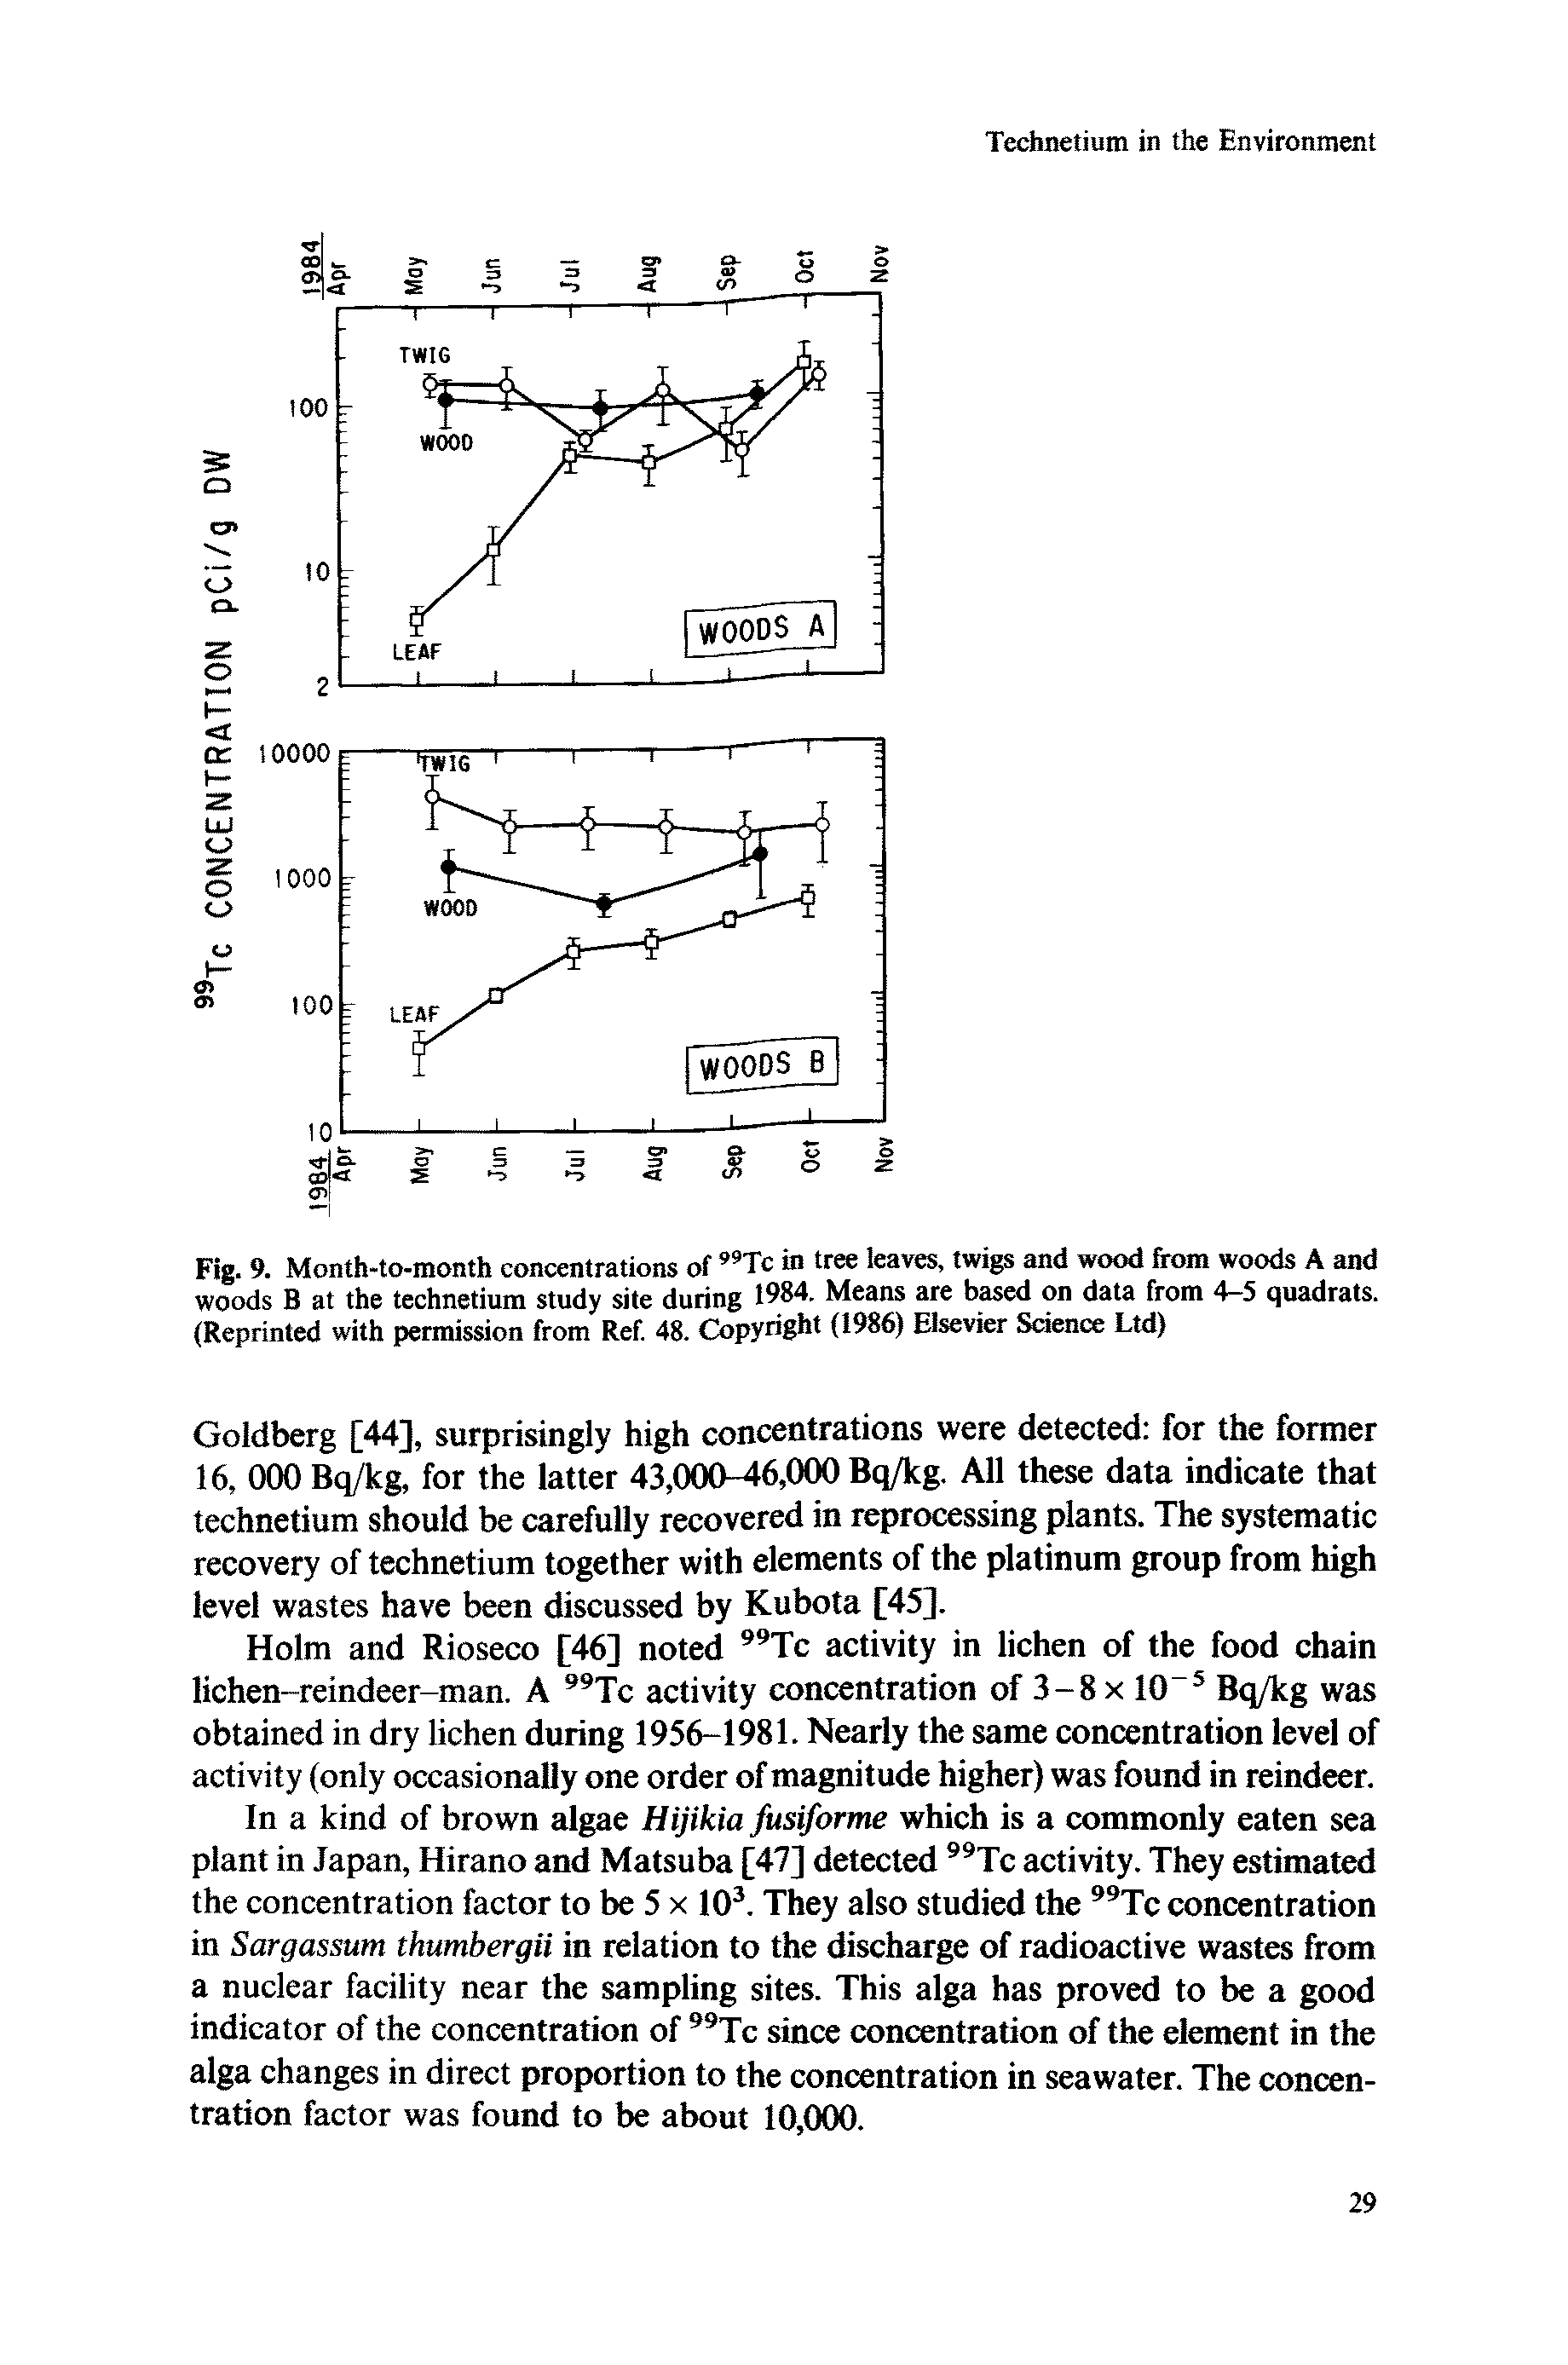 Fig. 9. Month-to-month concentrations of "Tc in tree leaves, twigs and wood from woods A and woods B at the technetium study site during 1984. Means are based on data from 4-5 quadrats. (Reprinted with permission from Ref. 48. Copyright (1986) Elsevier Science Ltd)...